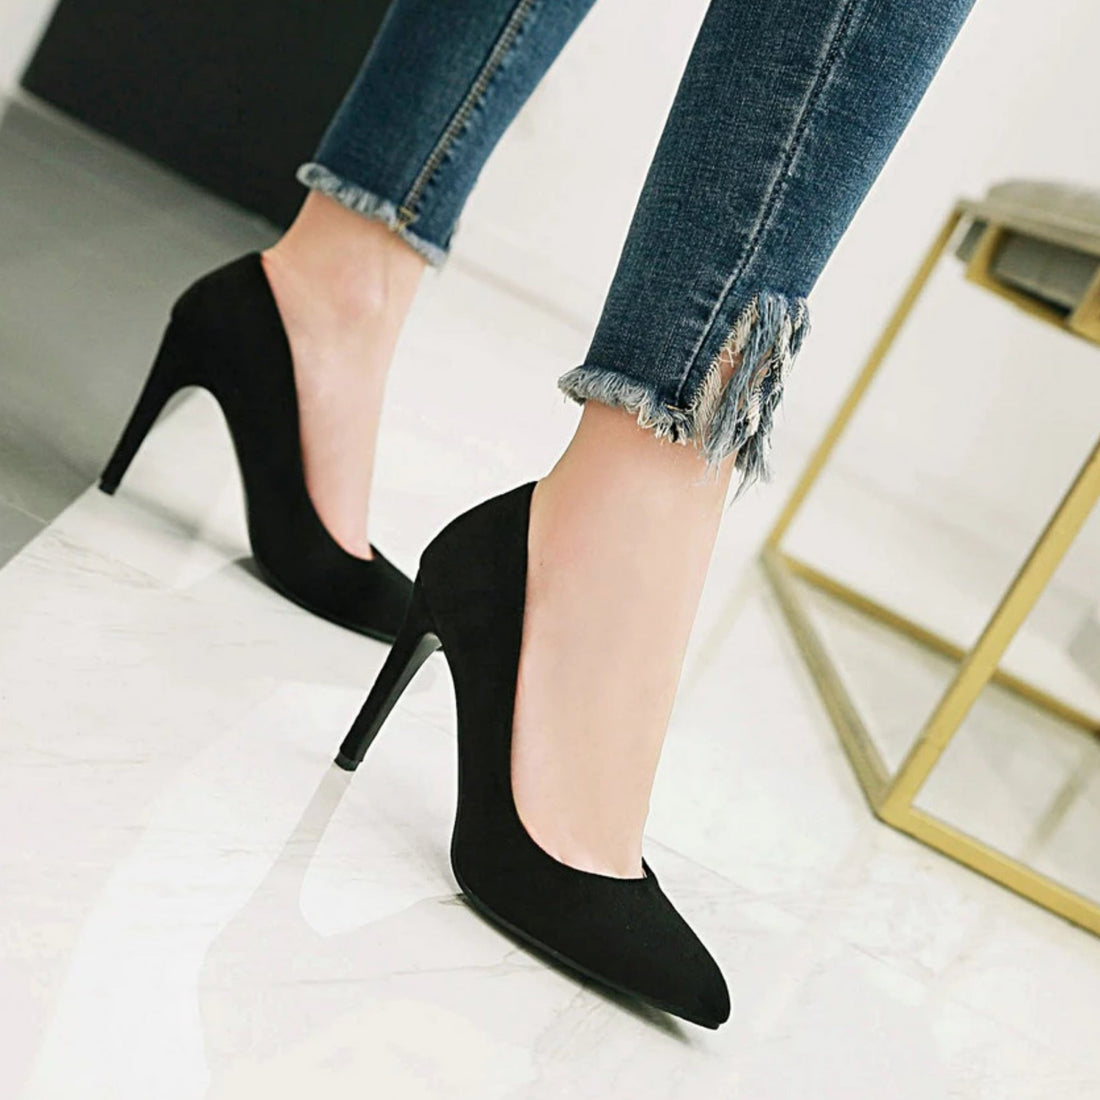 Women's Spring/Autumn Casual Pumps With Thin High Heels